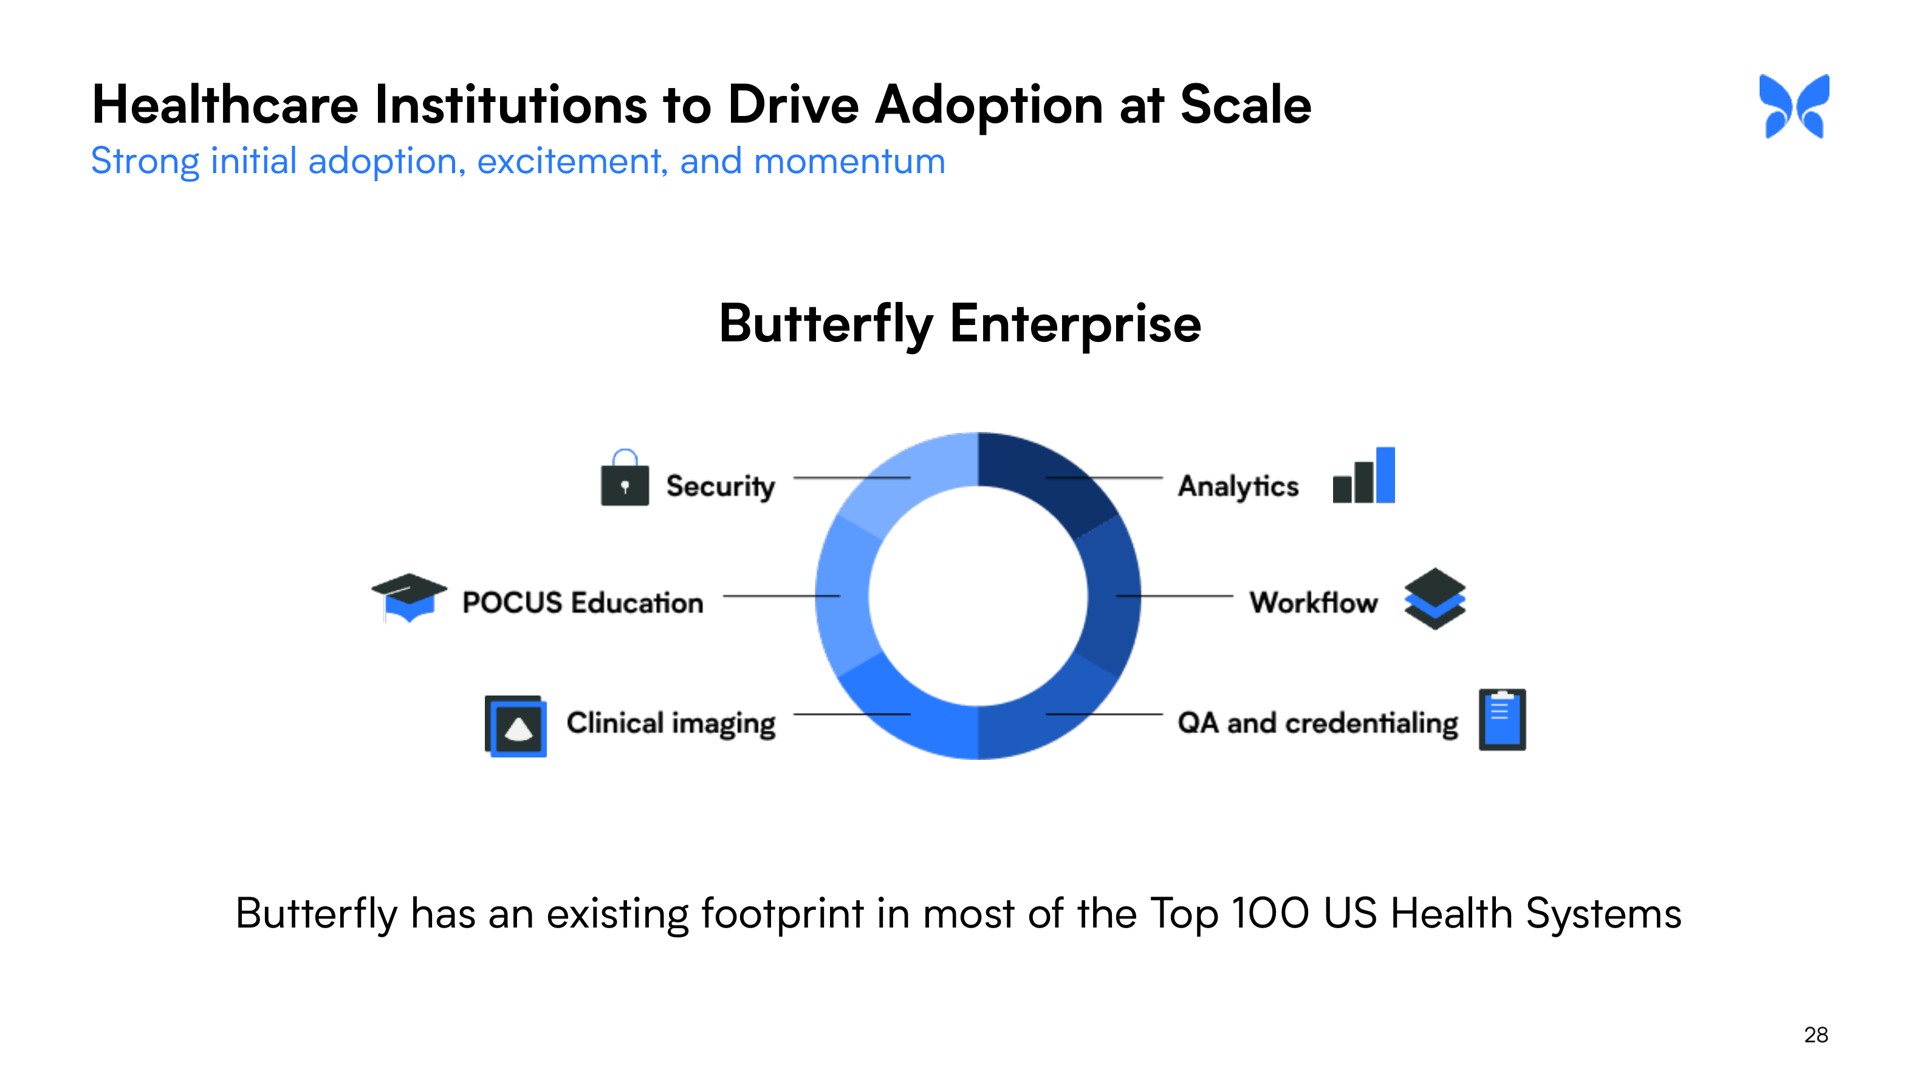 institutions to drive adoption at scale butterfly enterprise butterfly has an existing footprint in most of the top us health systems education | Butterfly